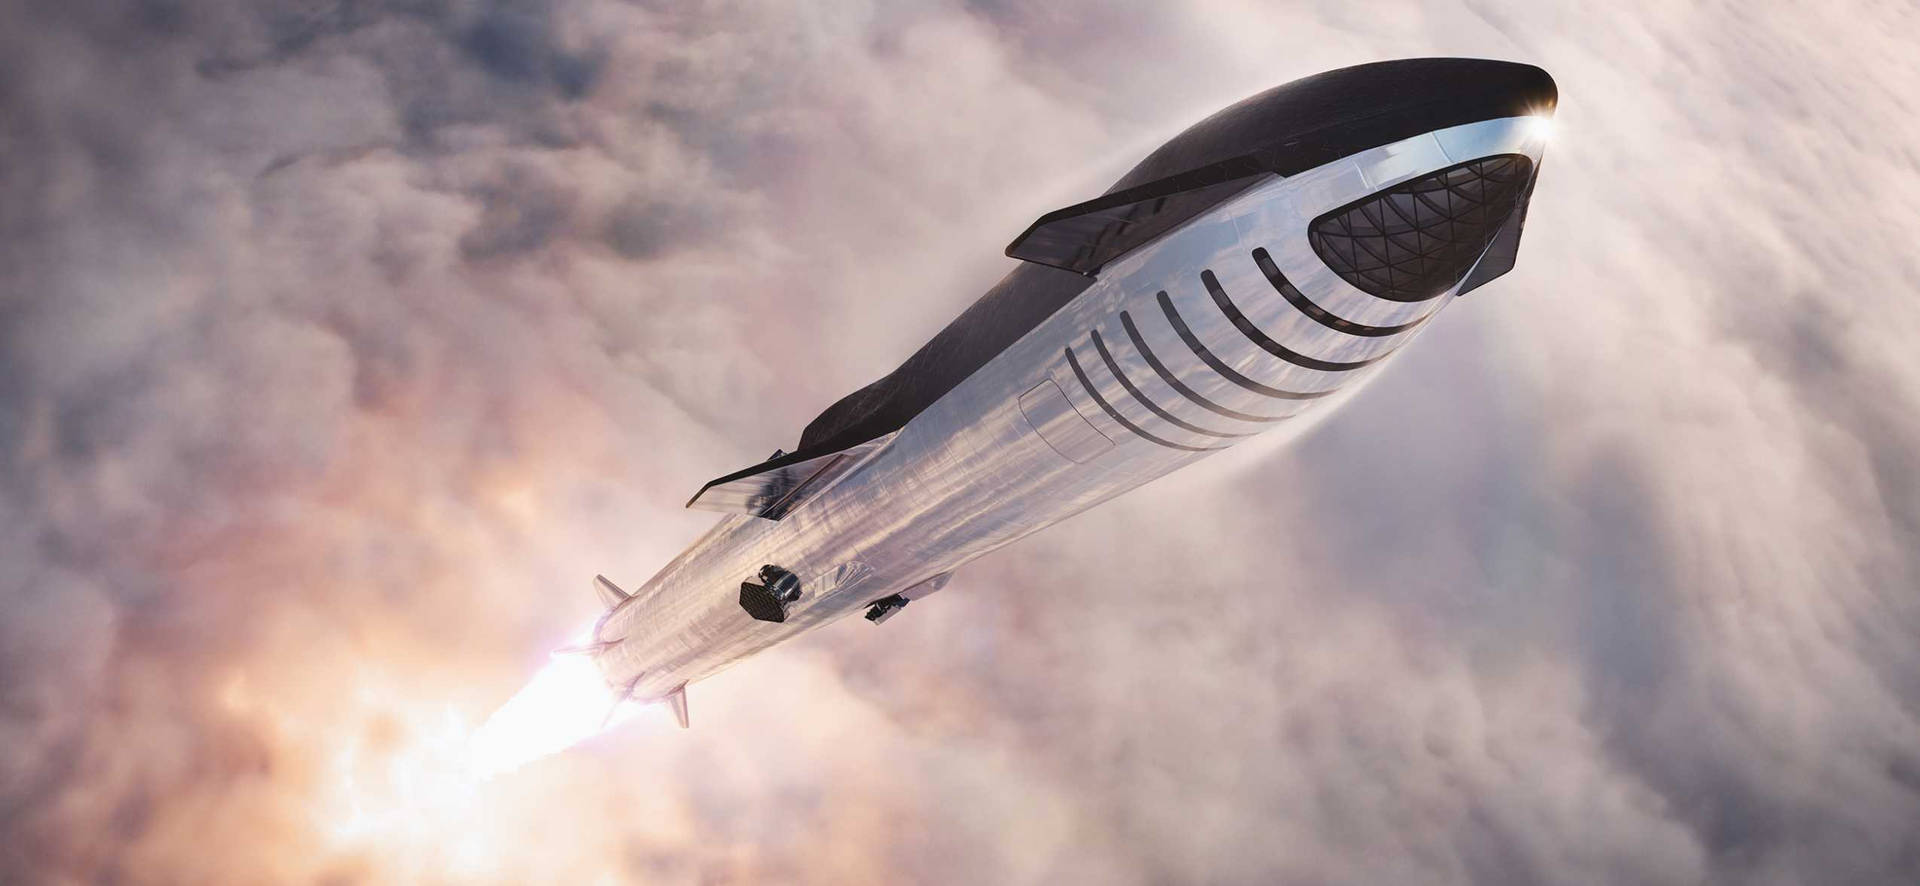 SpaceX Starship blasts off into space as it makes history Wallpaper